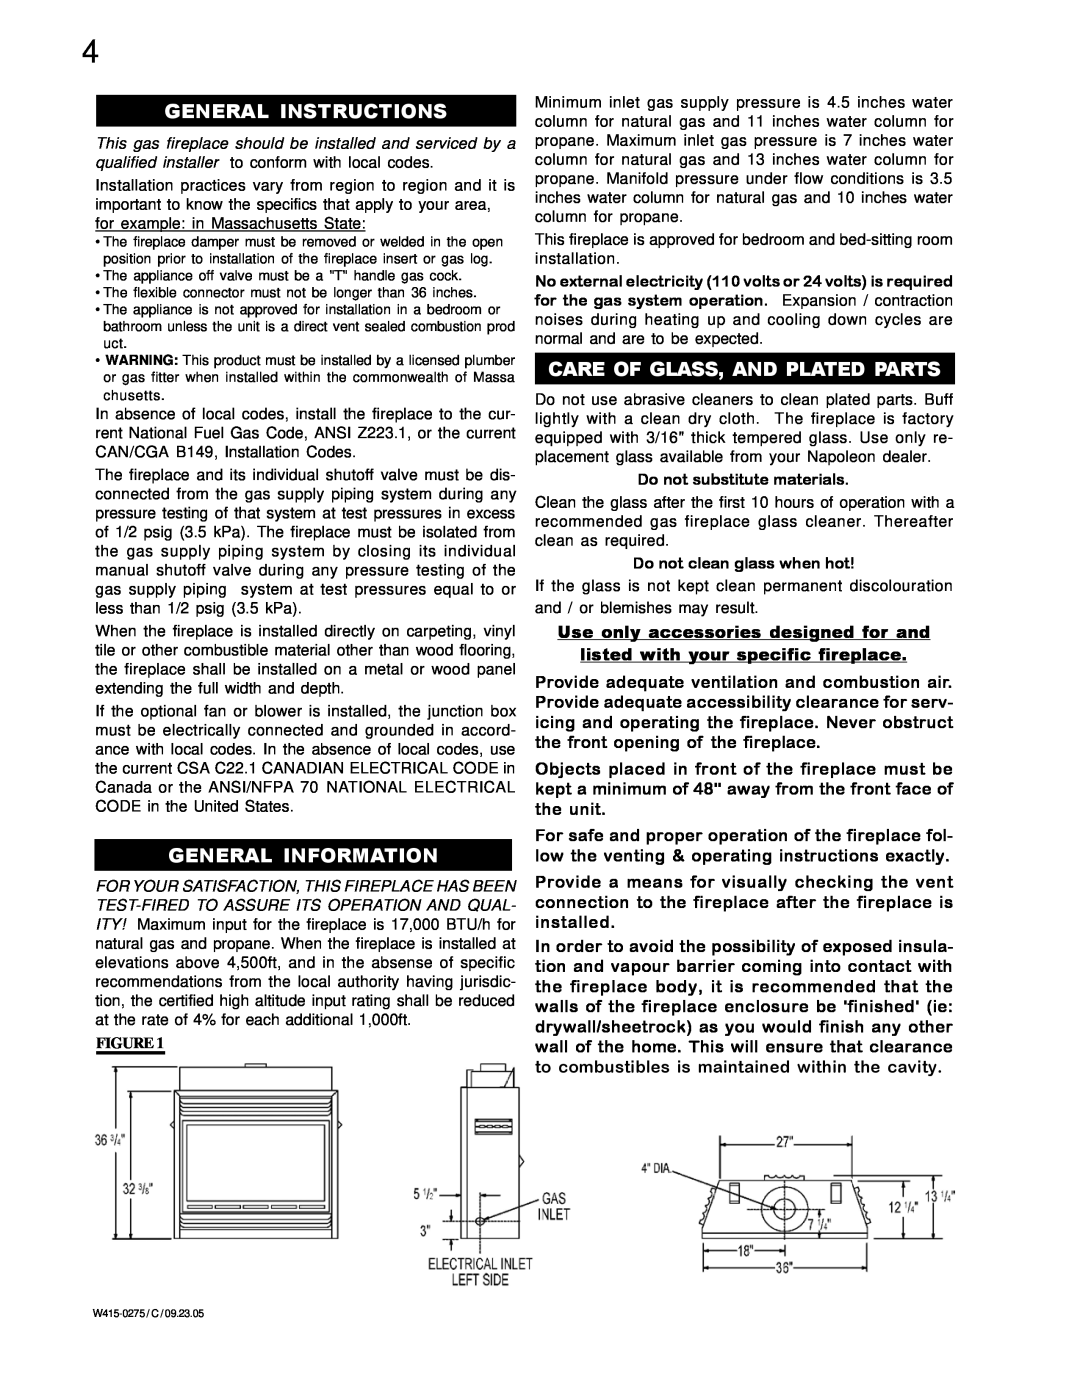 Napoleon Fireplaces BGNV36N, BGNV36P manual General Instructions, General Information, Care Of Glass, And Plated Parts 